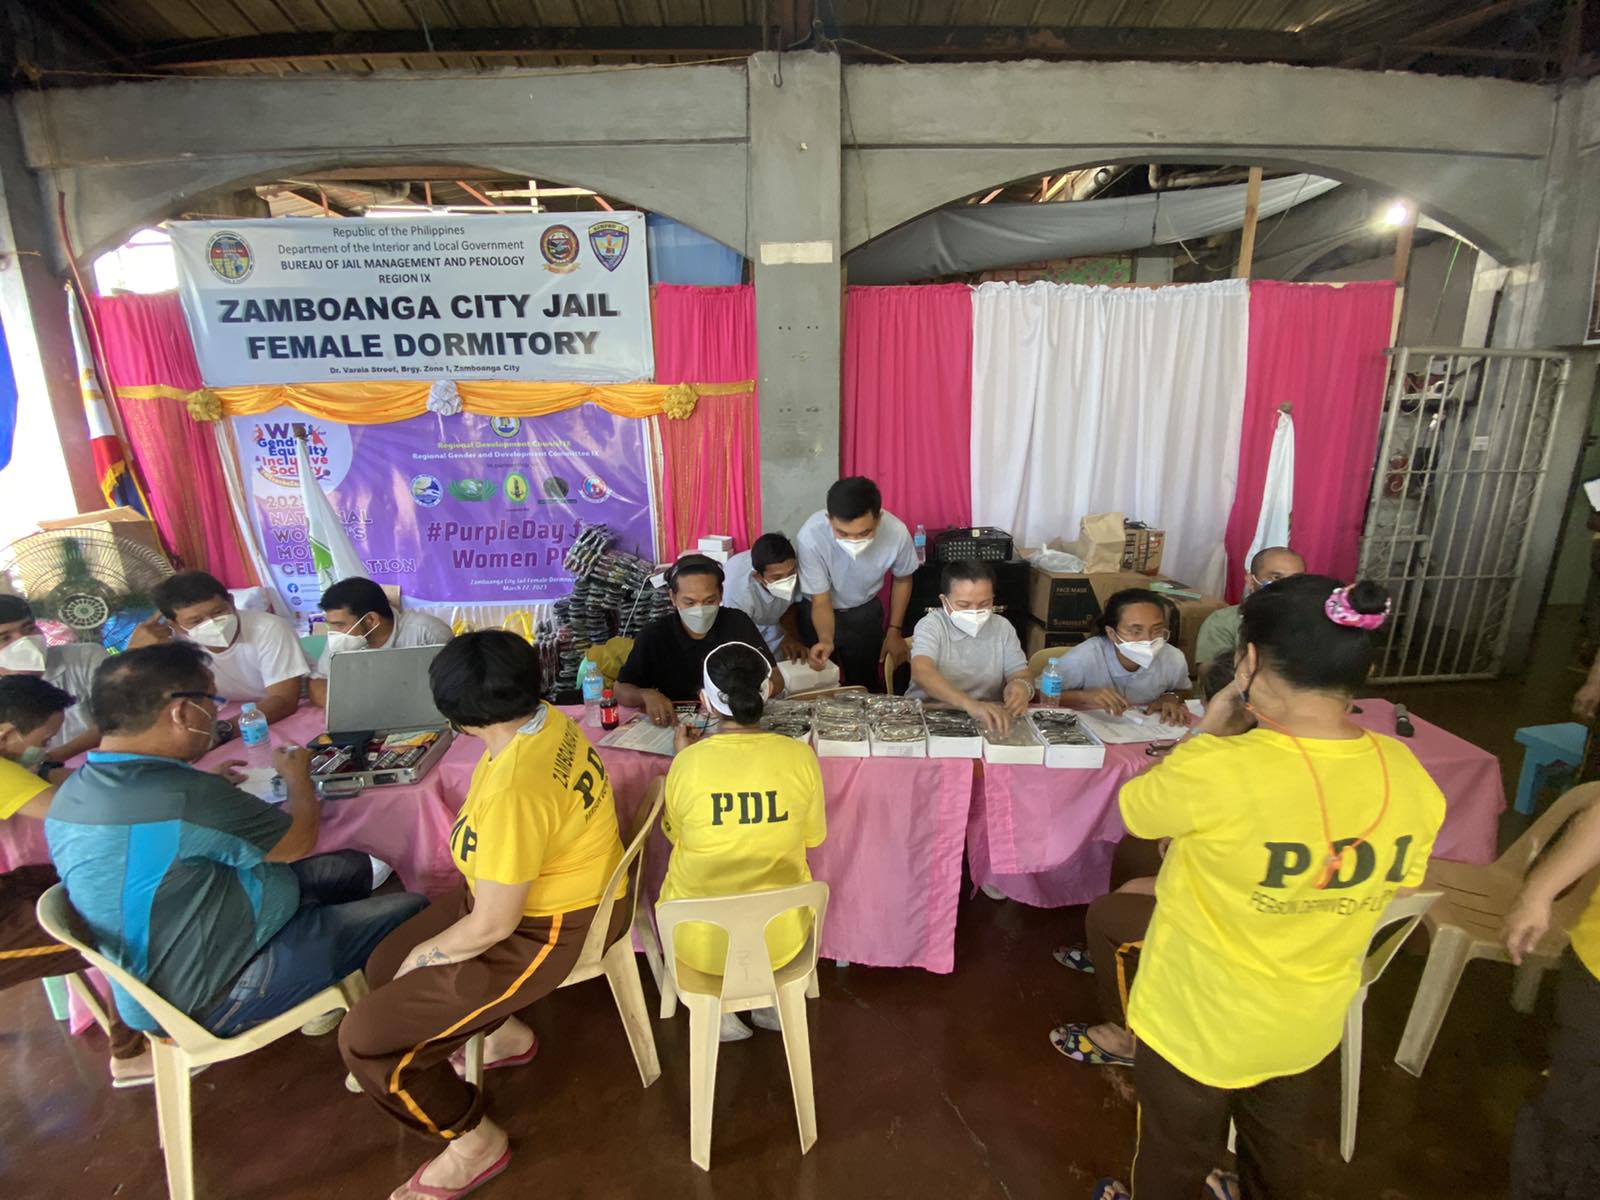 146 persons deprived of liberty (PDLs) get free eye check up from the joint initiative.